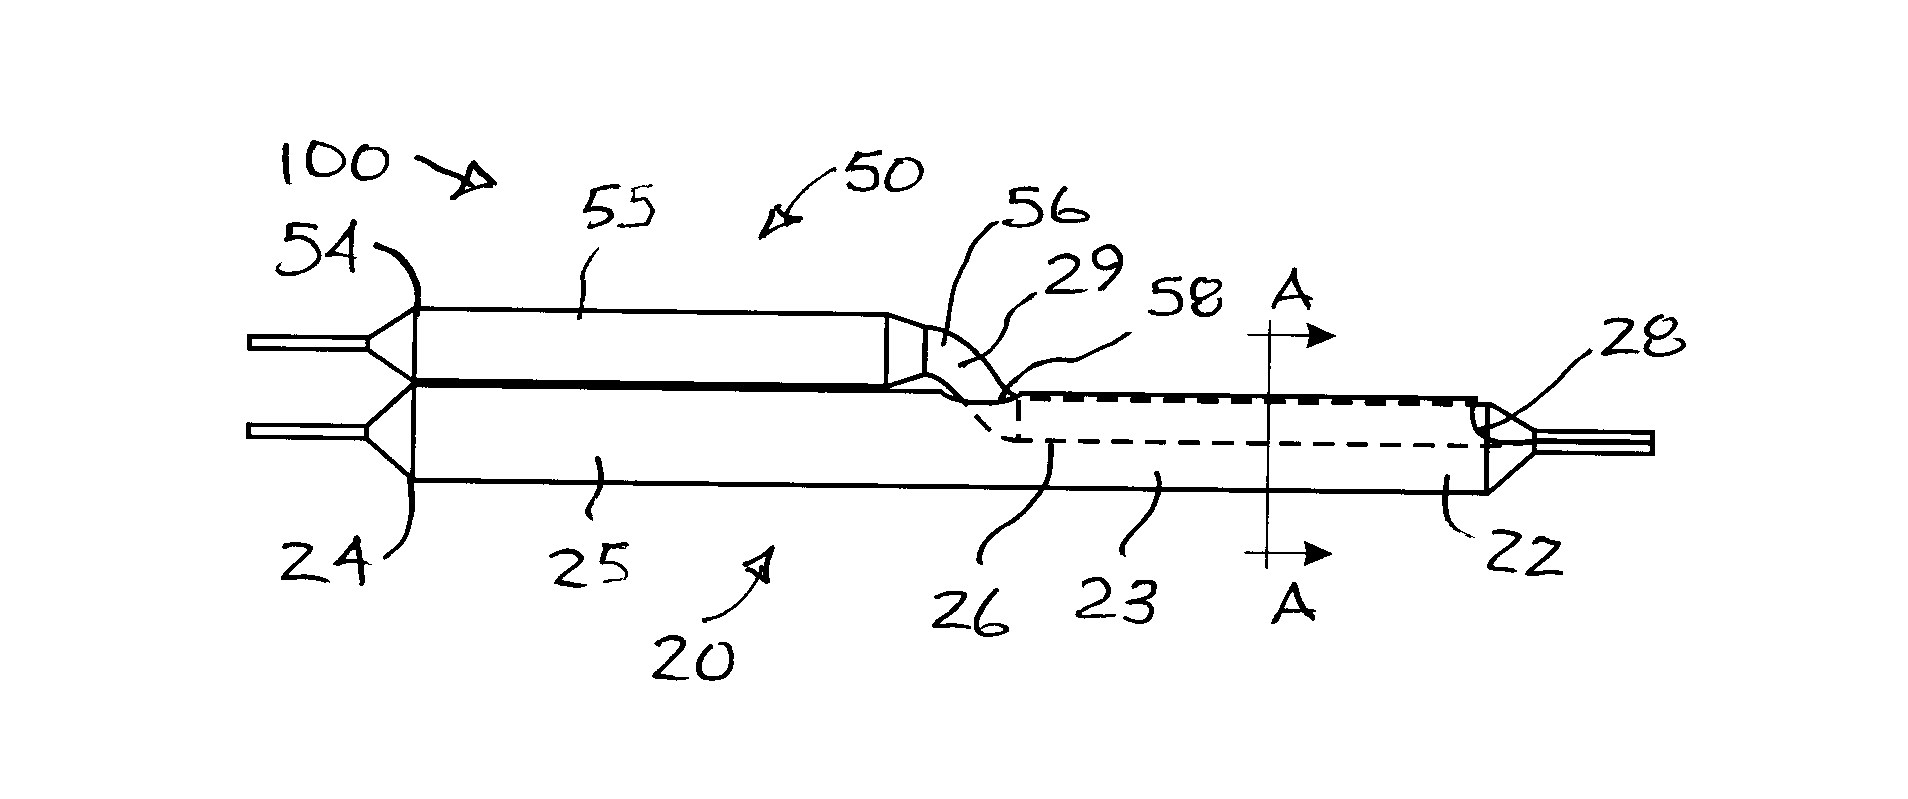 Bifurcated dual-balloon catheter system for bifurcated vessels